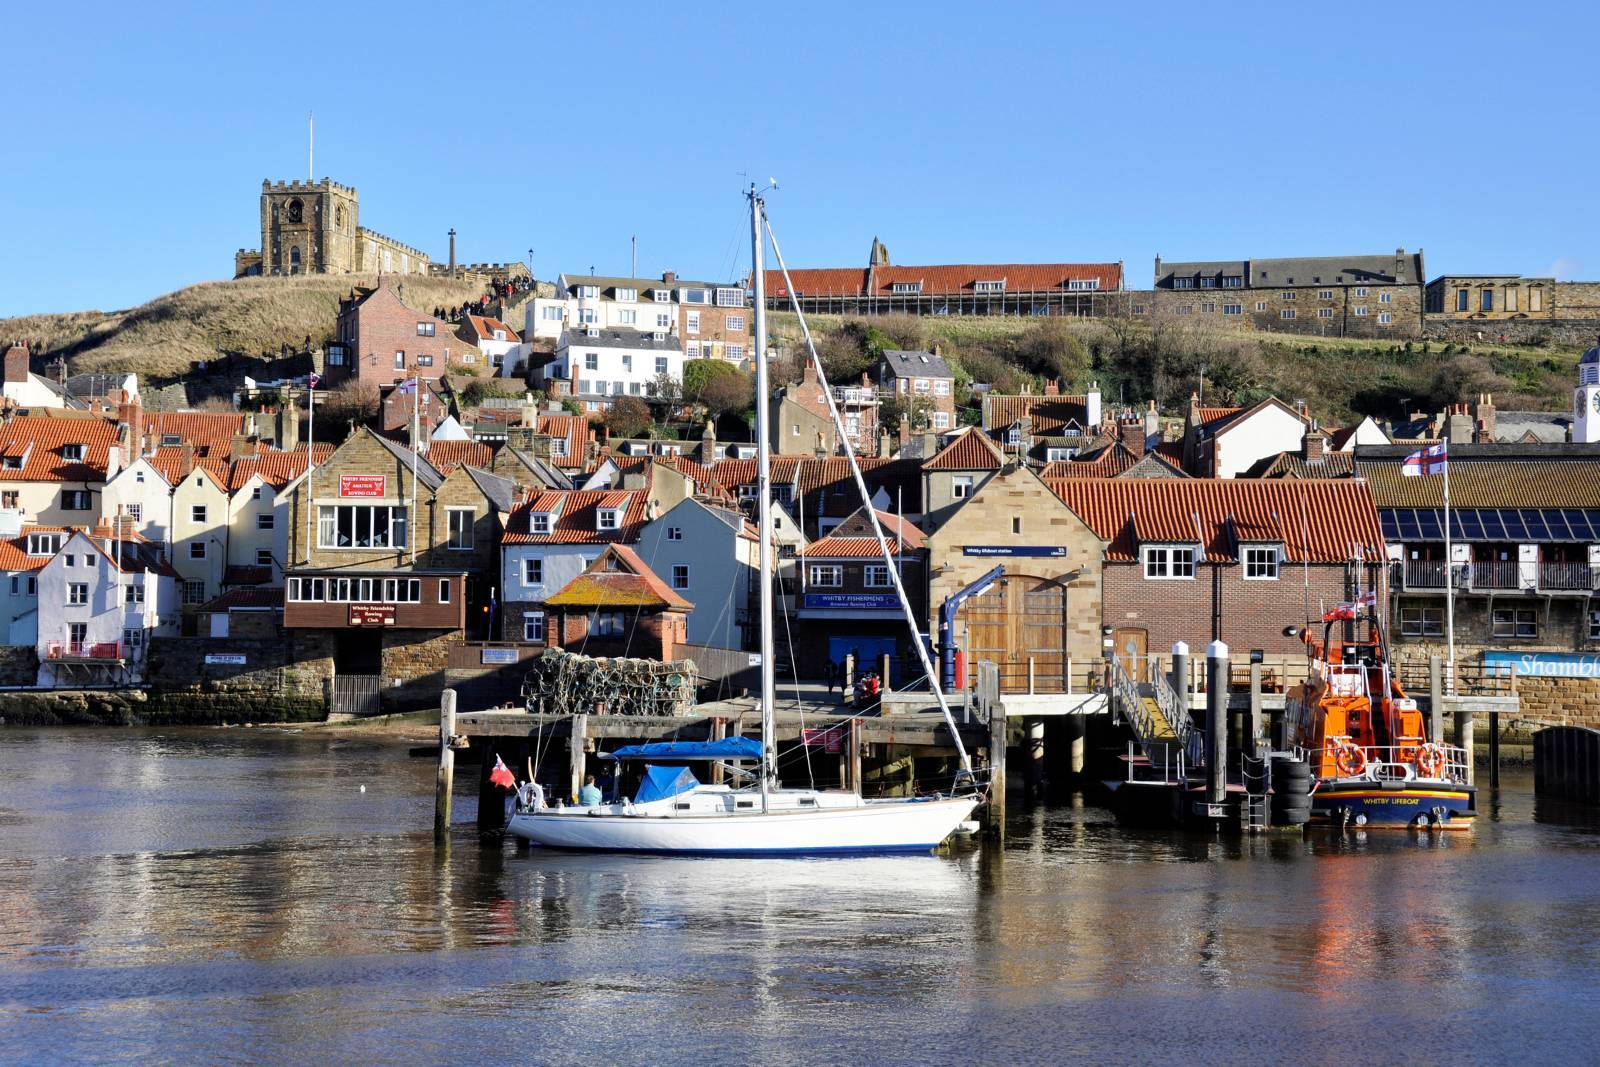 Whitby harbourfront on a sunny day lifeboat station and sailing yacht visible in the foreground